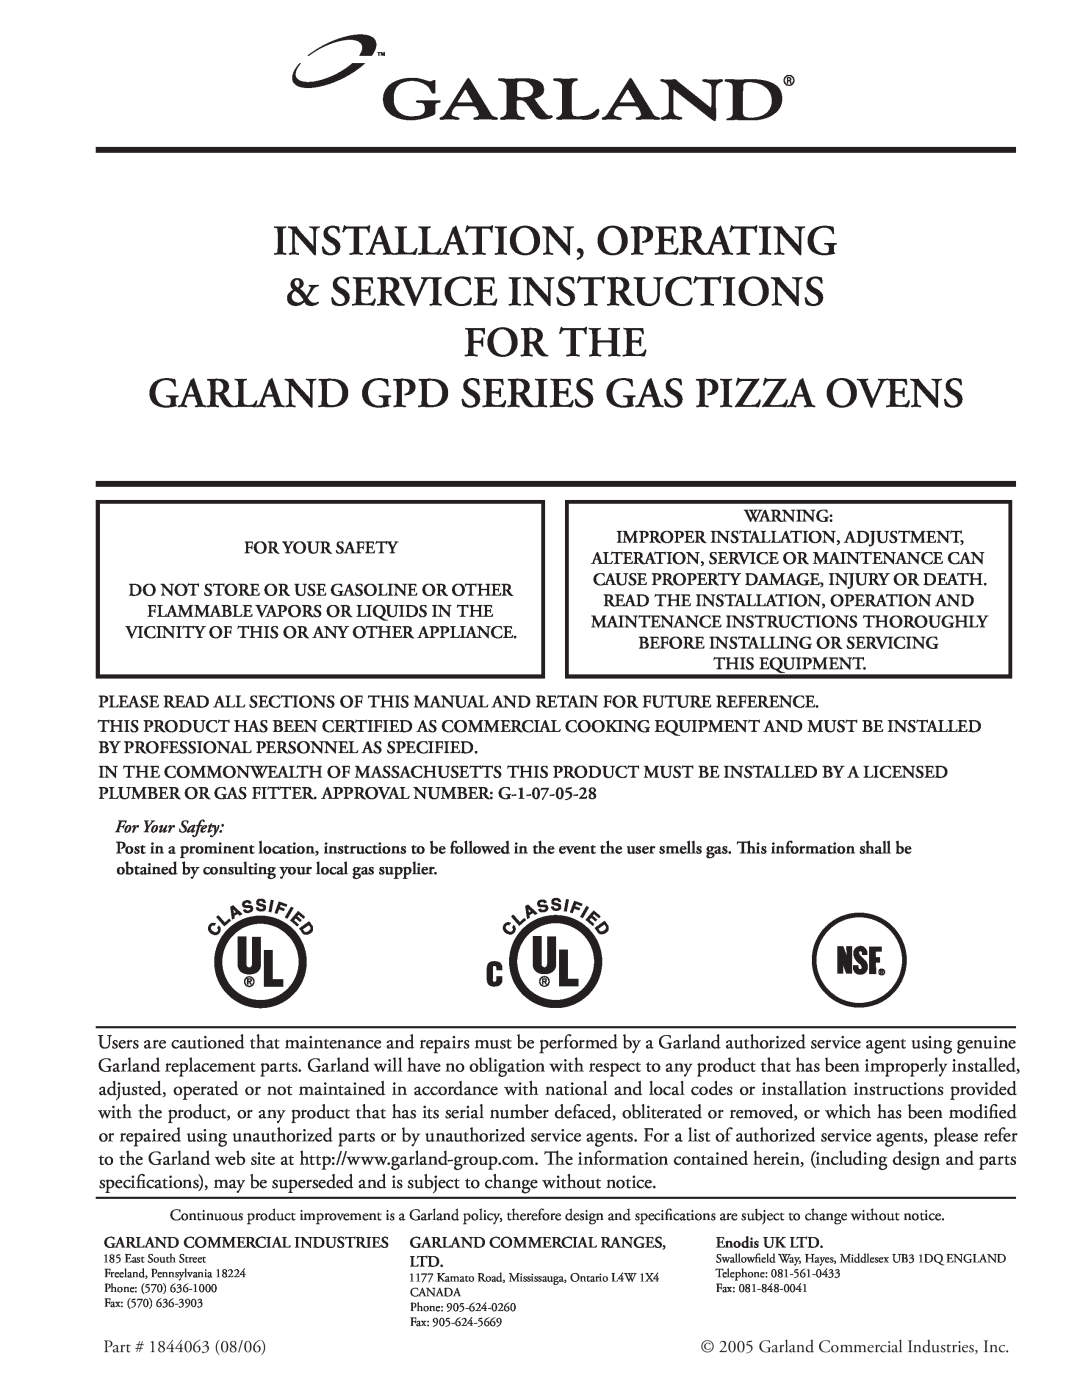 Garland GAS PIZZA OVENS installation instructions Installation, Operating Service Instructions For The, For Your Safety 